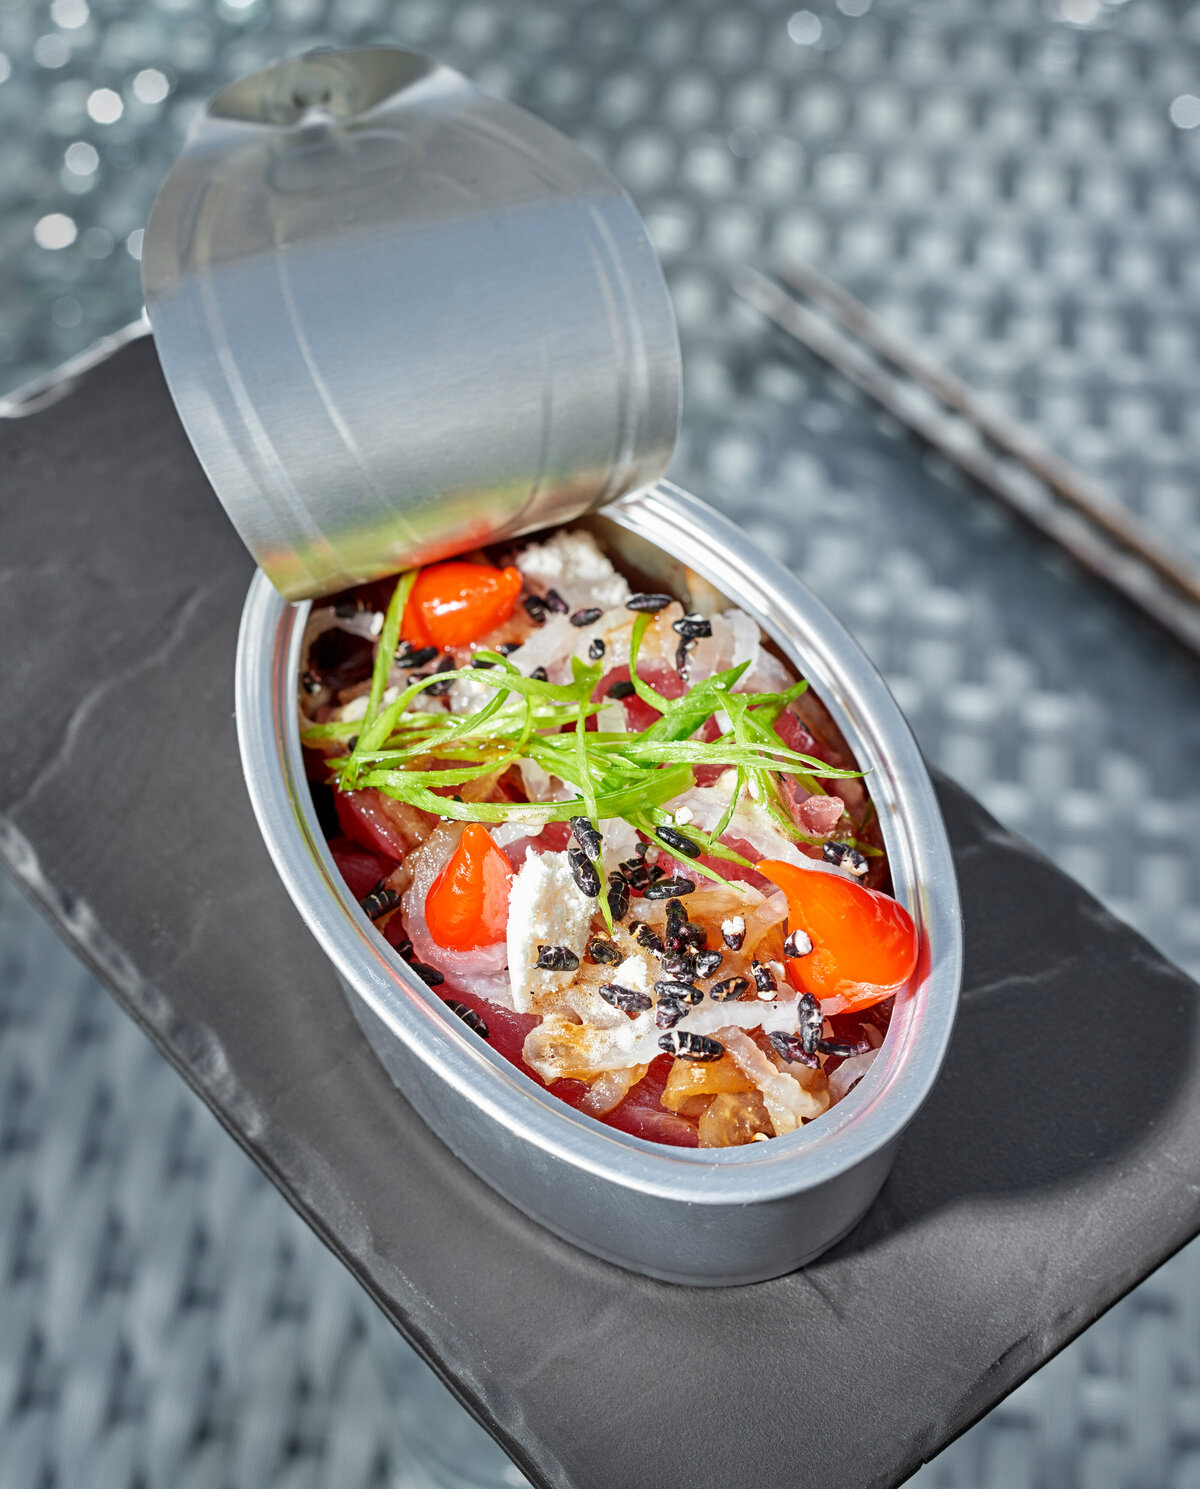 A tin can filled with a colorful dish